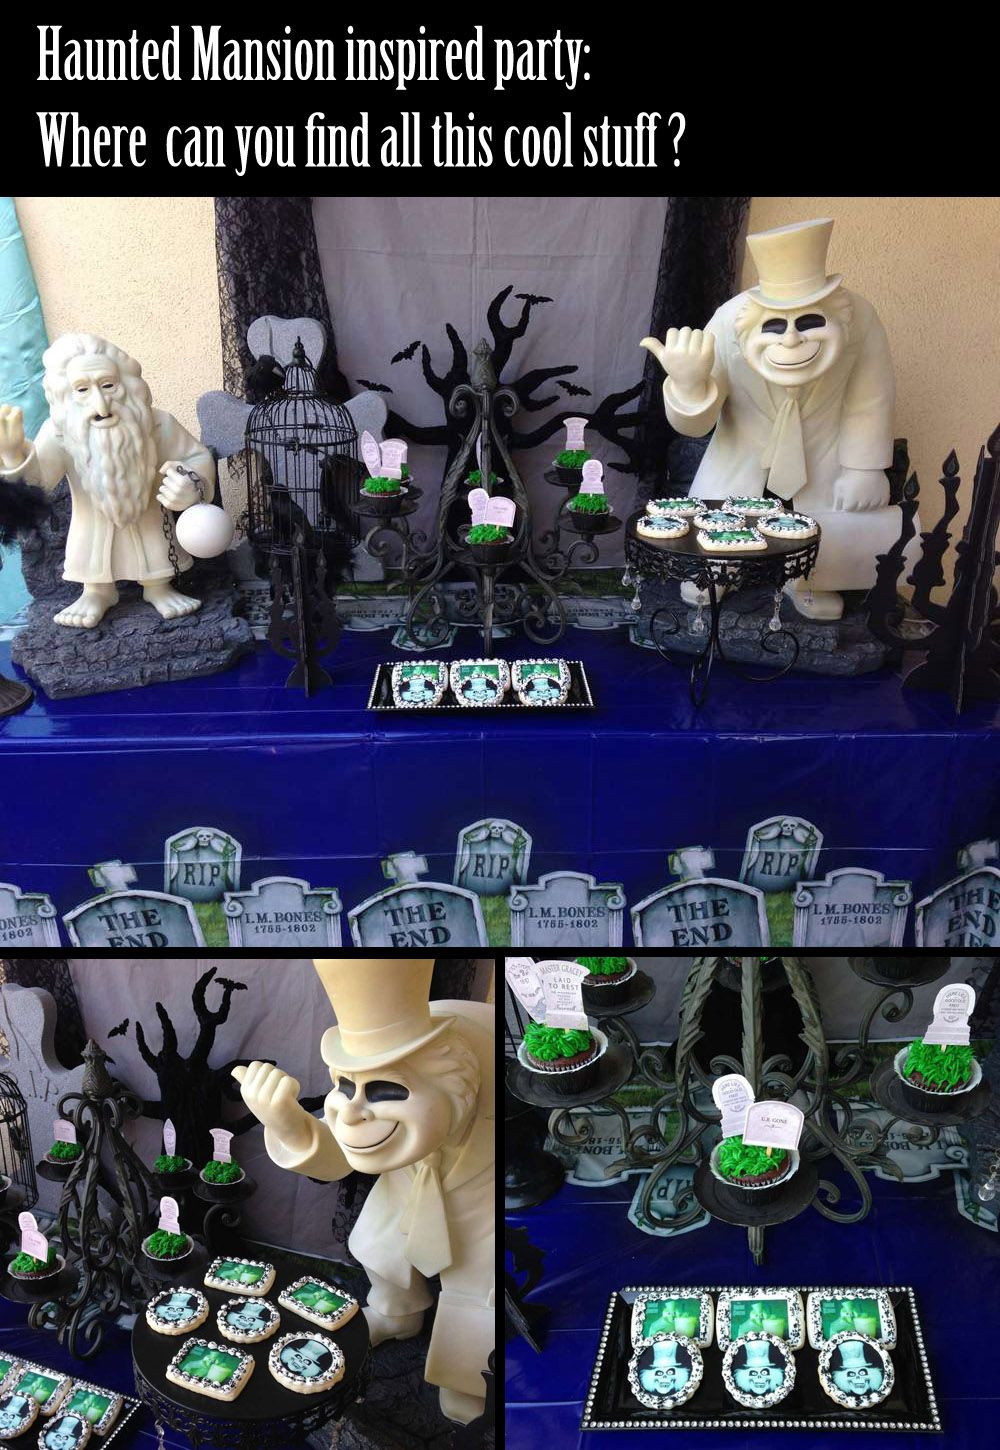 Haunted Halloween Party Ideas
 Haunted Mansion Inspired Party The cupcake topper